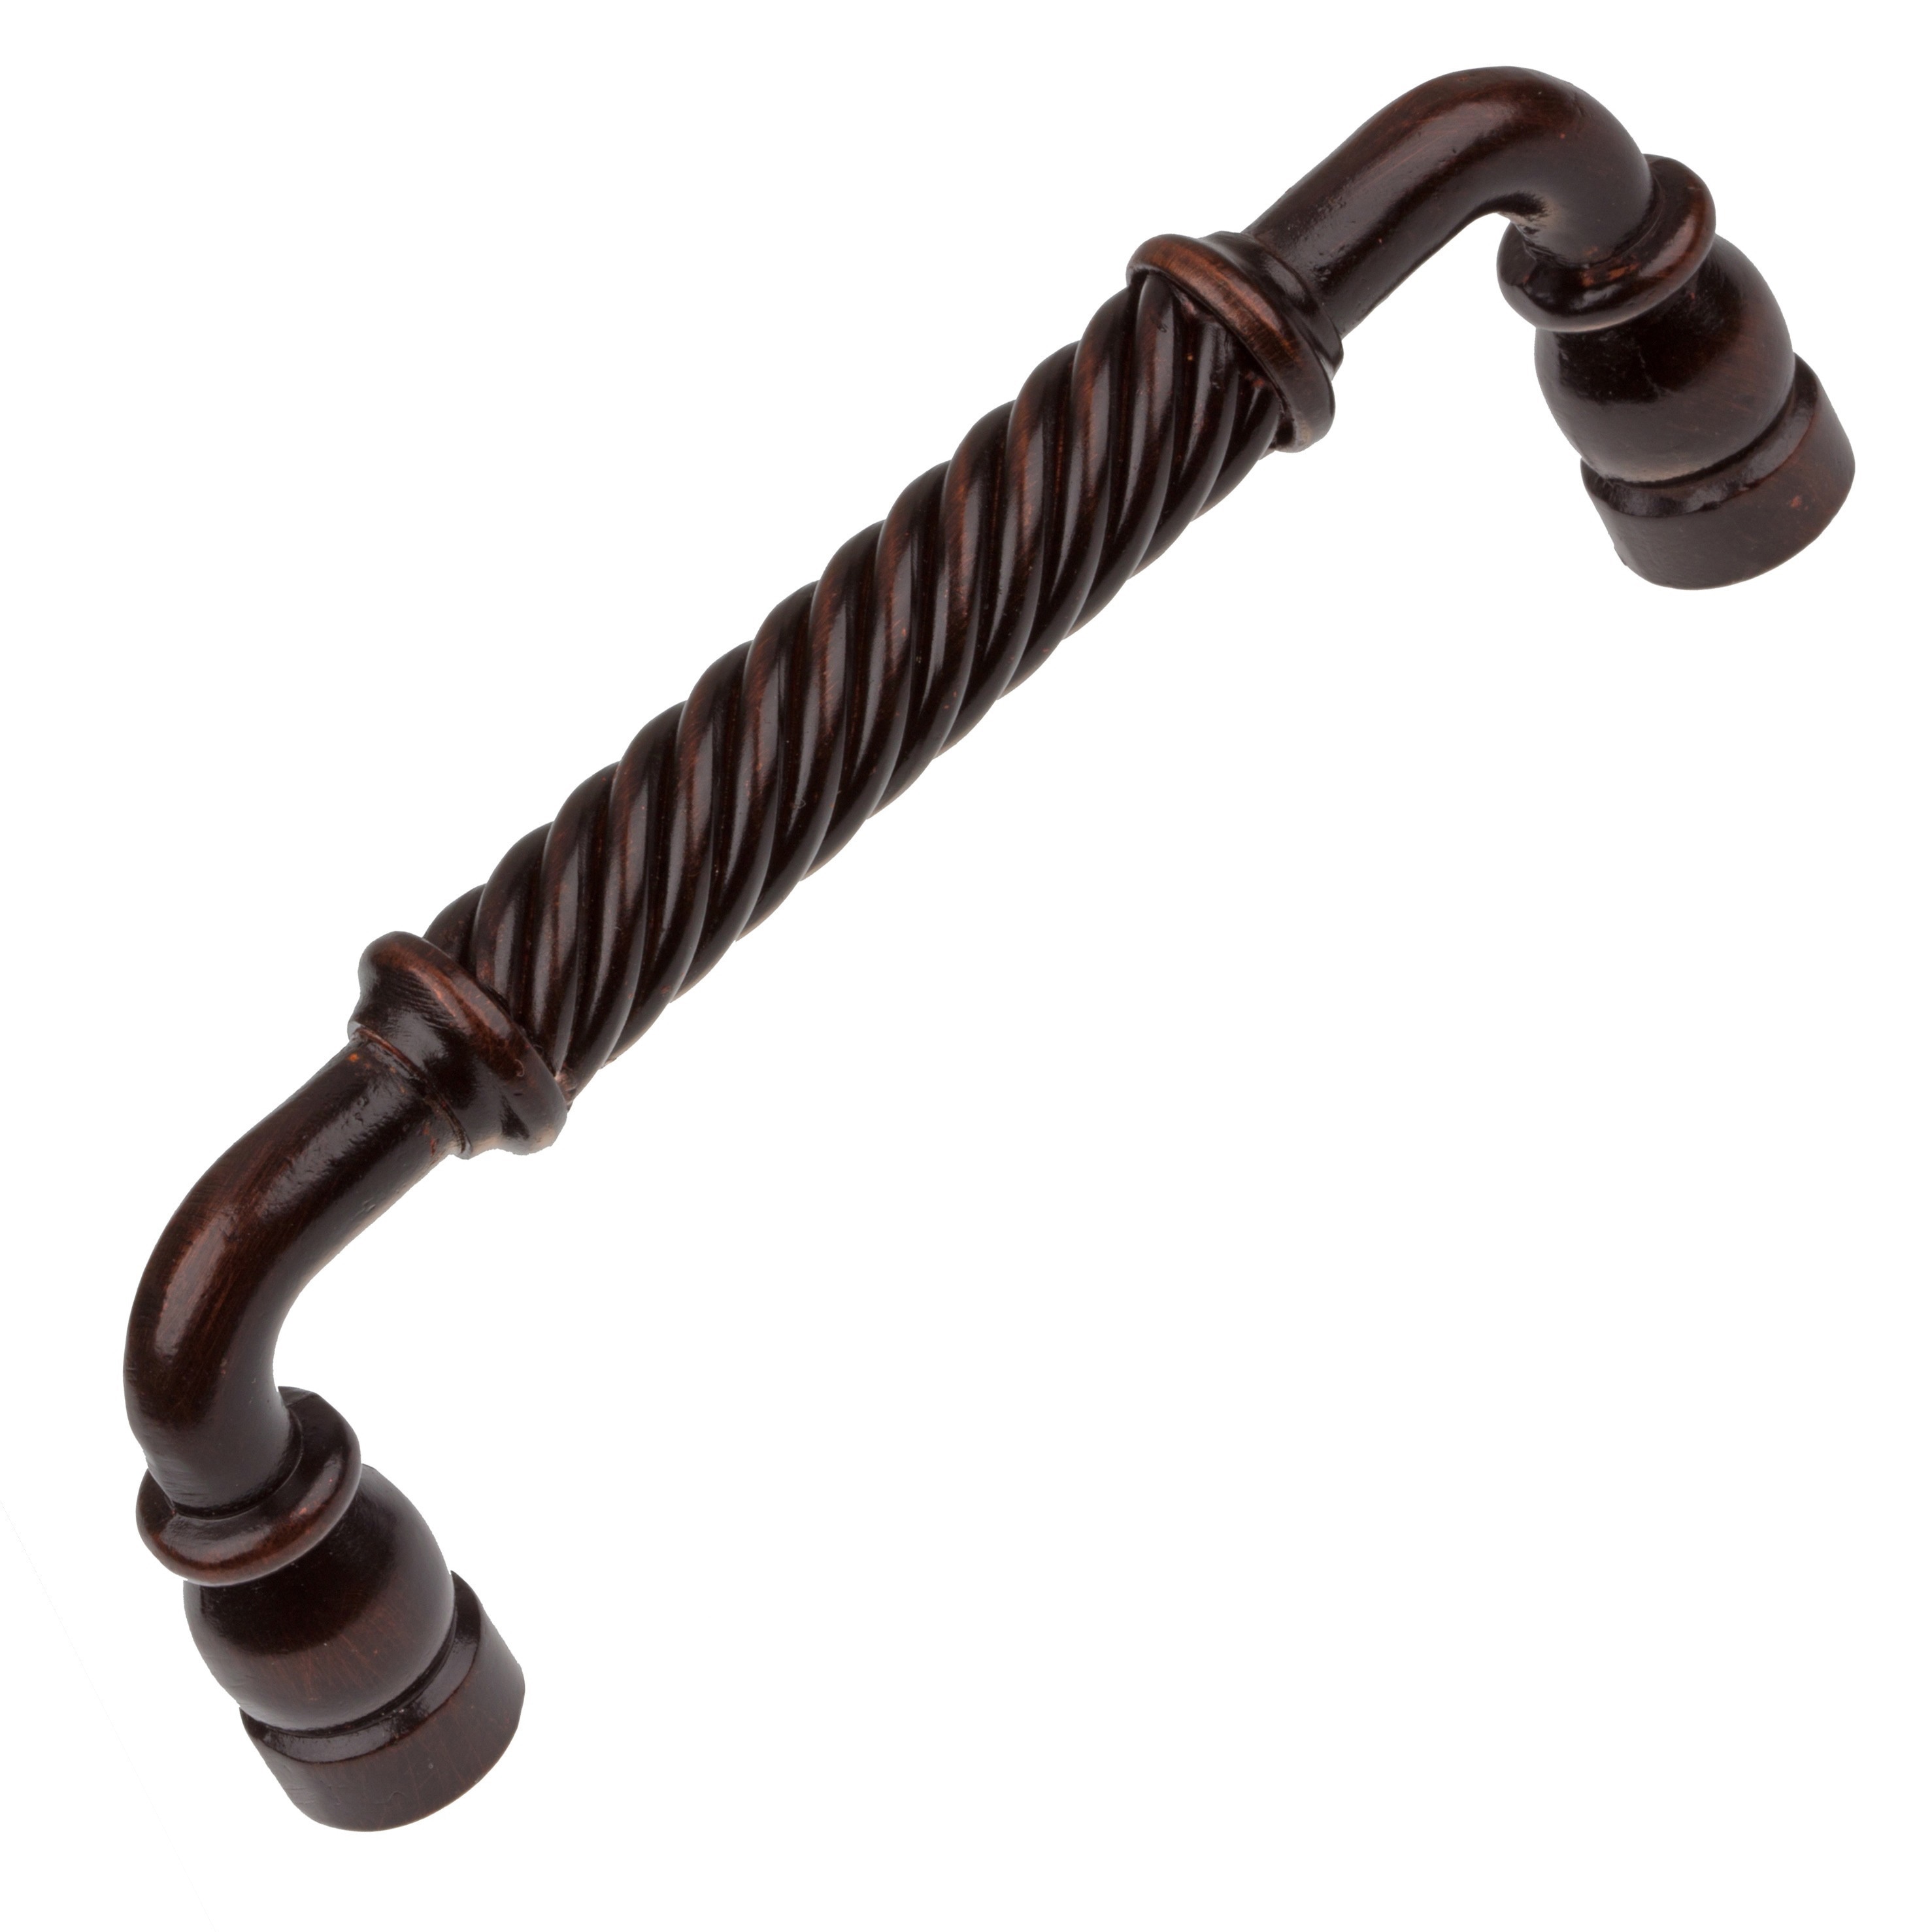 GlideRite 5 inch CC Oil Rubbed Bronze Twisted Cabinet Drawer Pulls Pack of 10